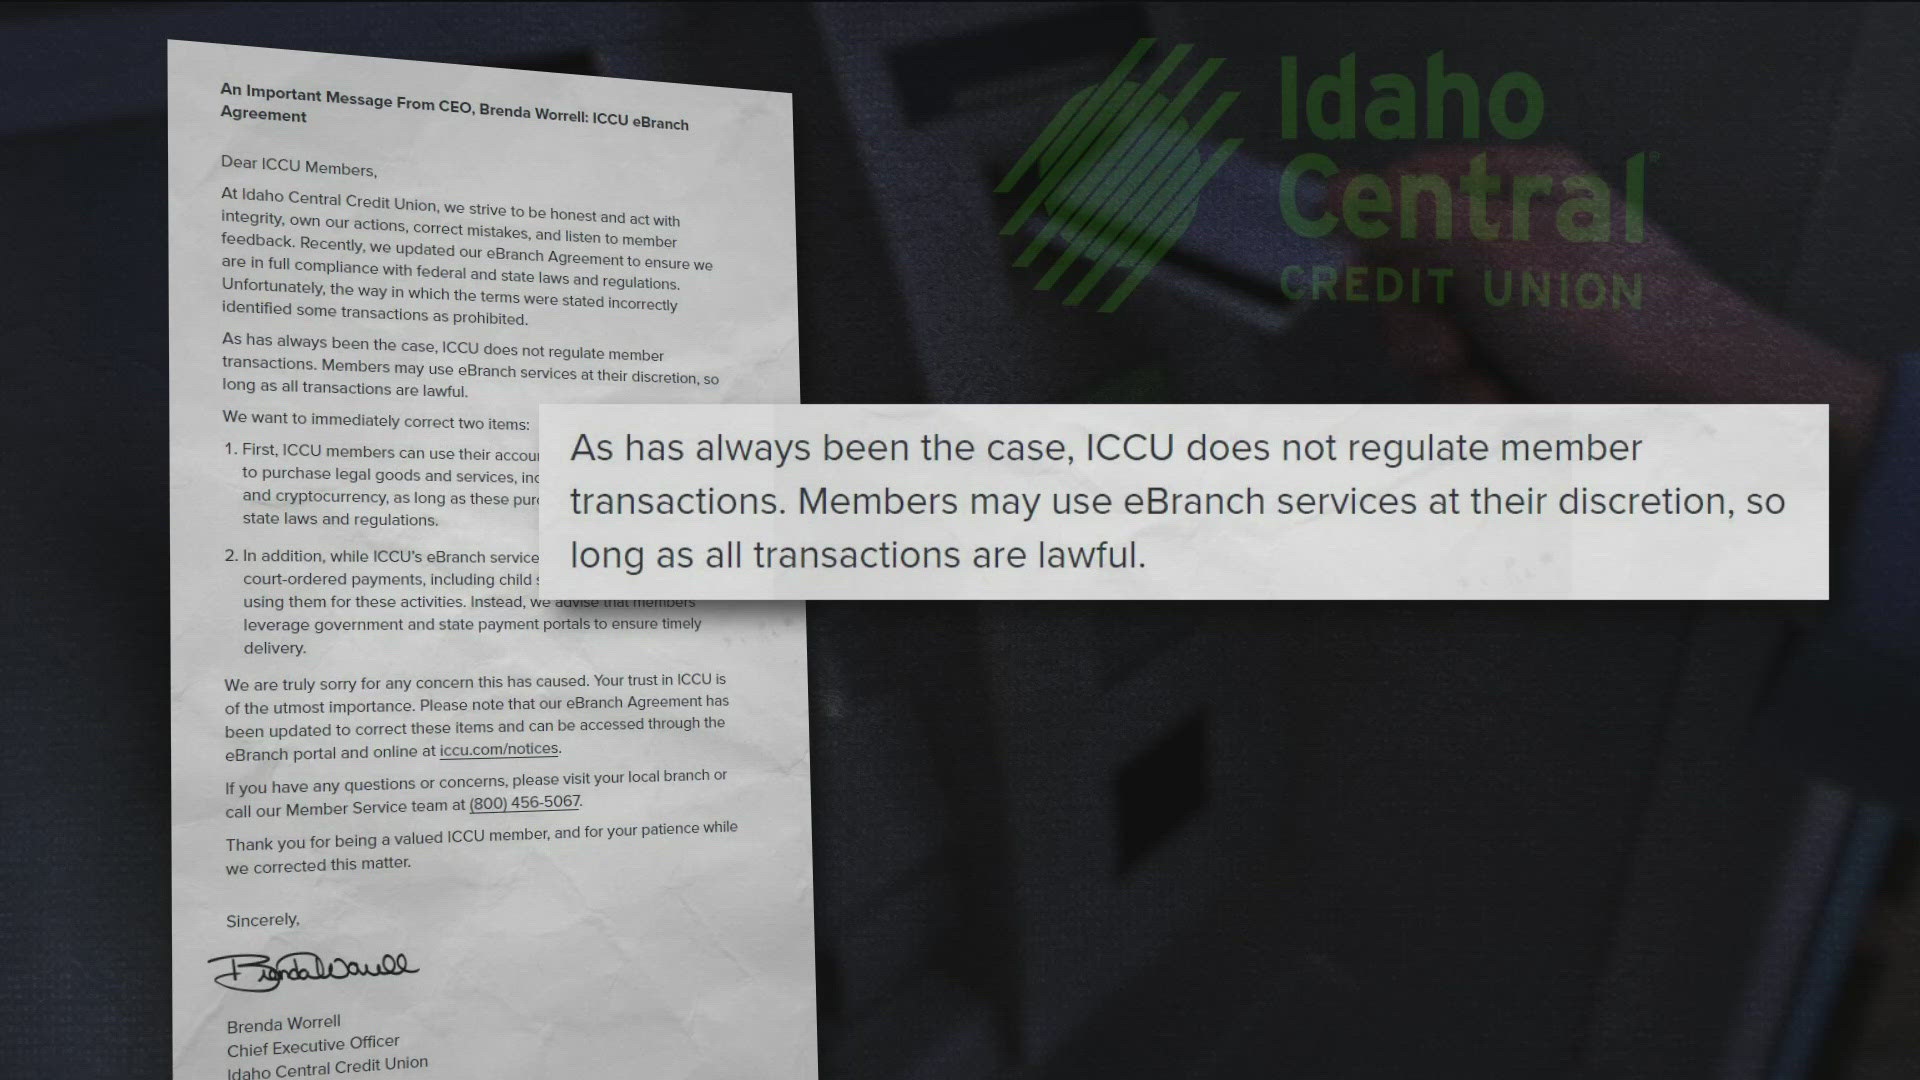 Brenda Worell, CEO of ICCU, released a message to members stating the company has clarified the language regarding its new terms and conditions.